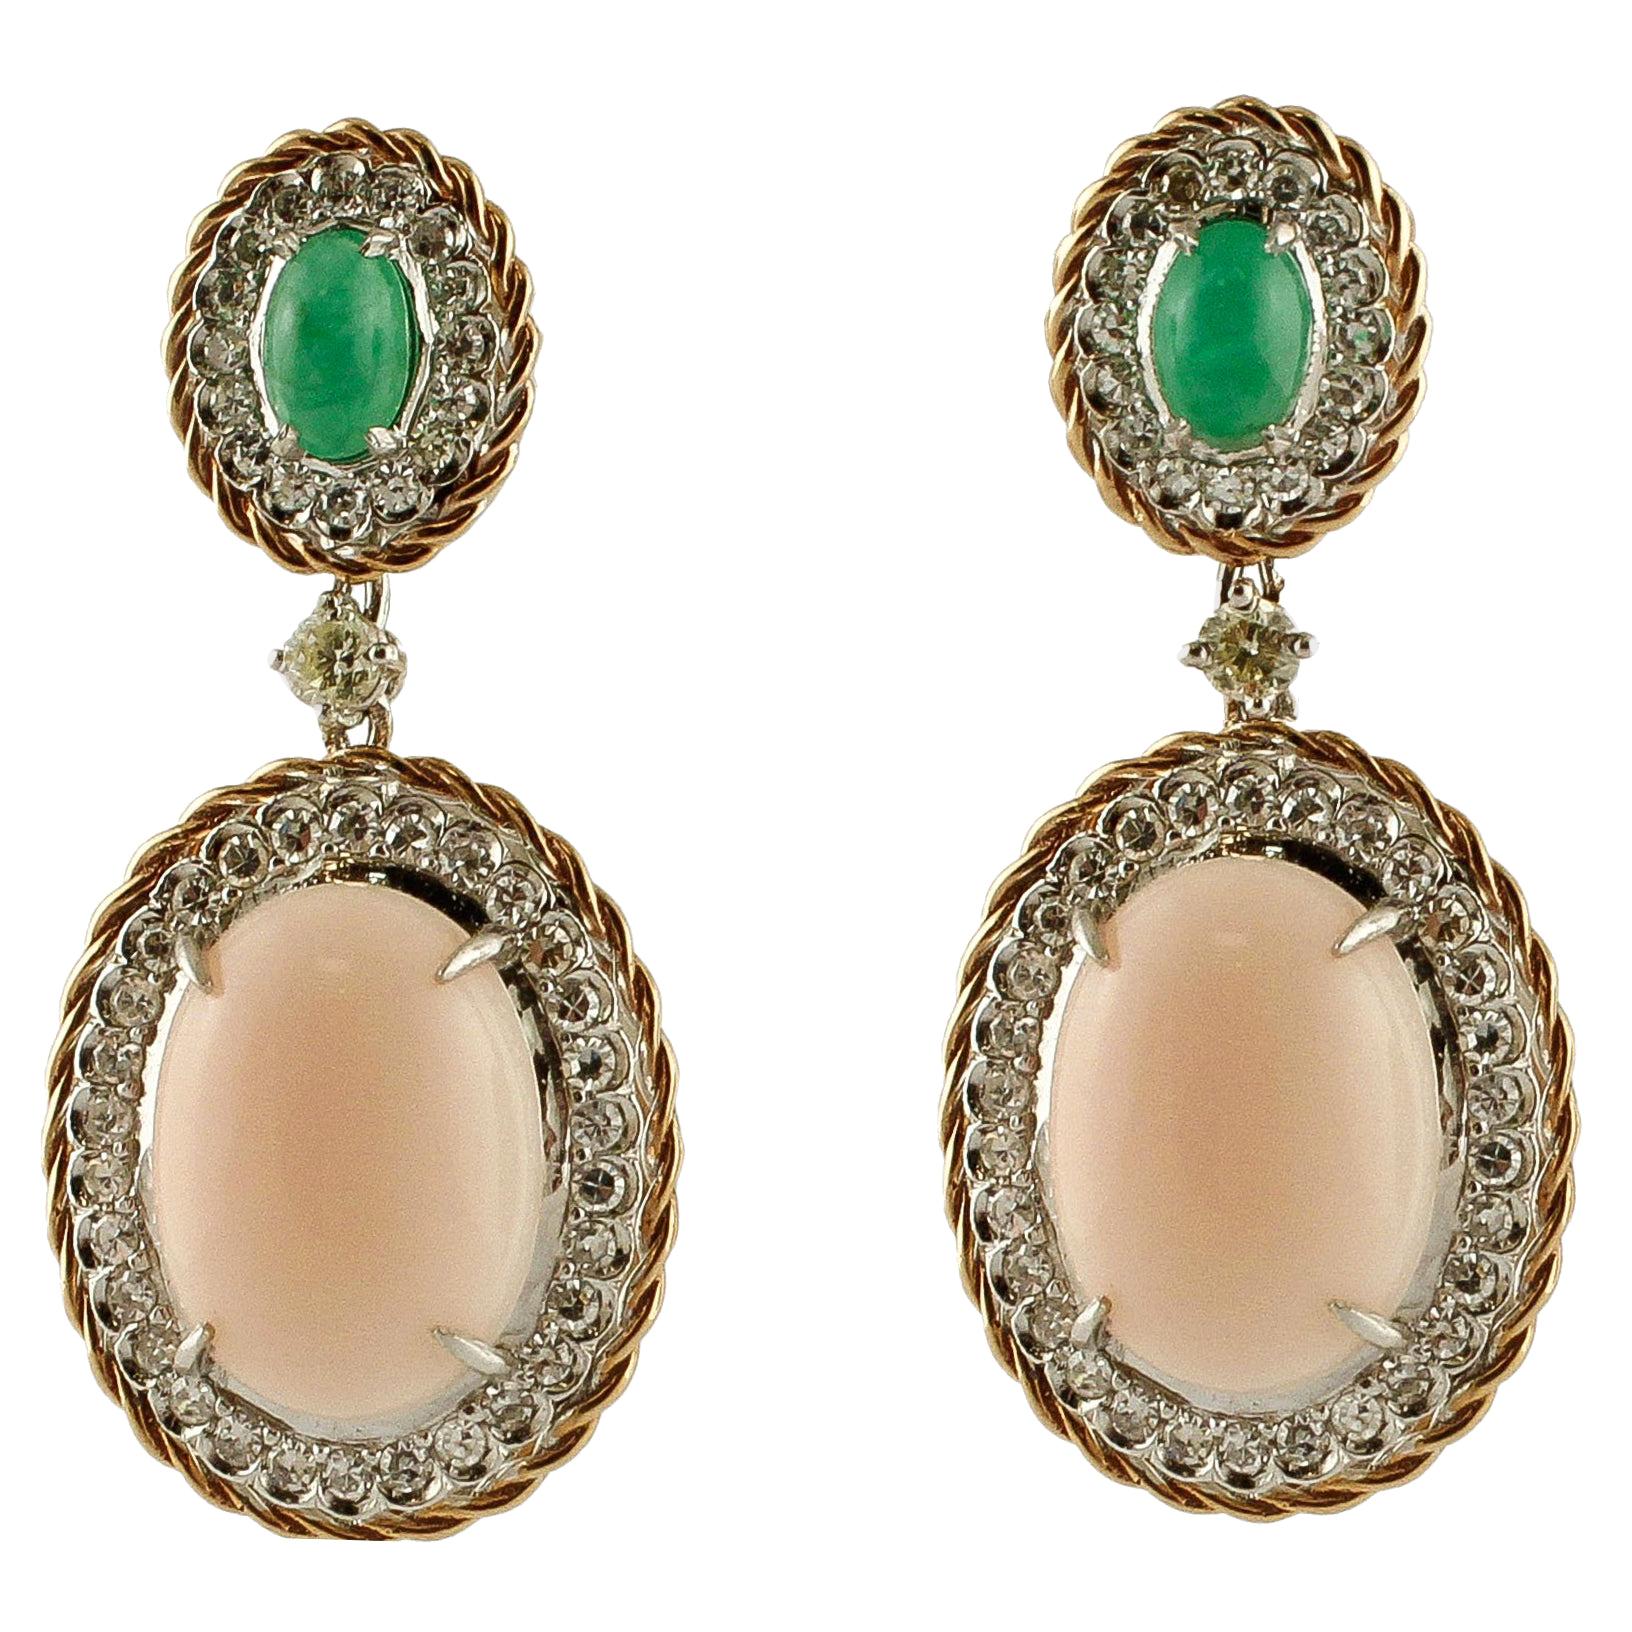 Diamonds, Emeralds, Oval Shape Pink Coral, 14 Karat Rose and White Gold Earrings